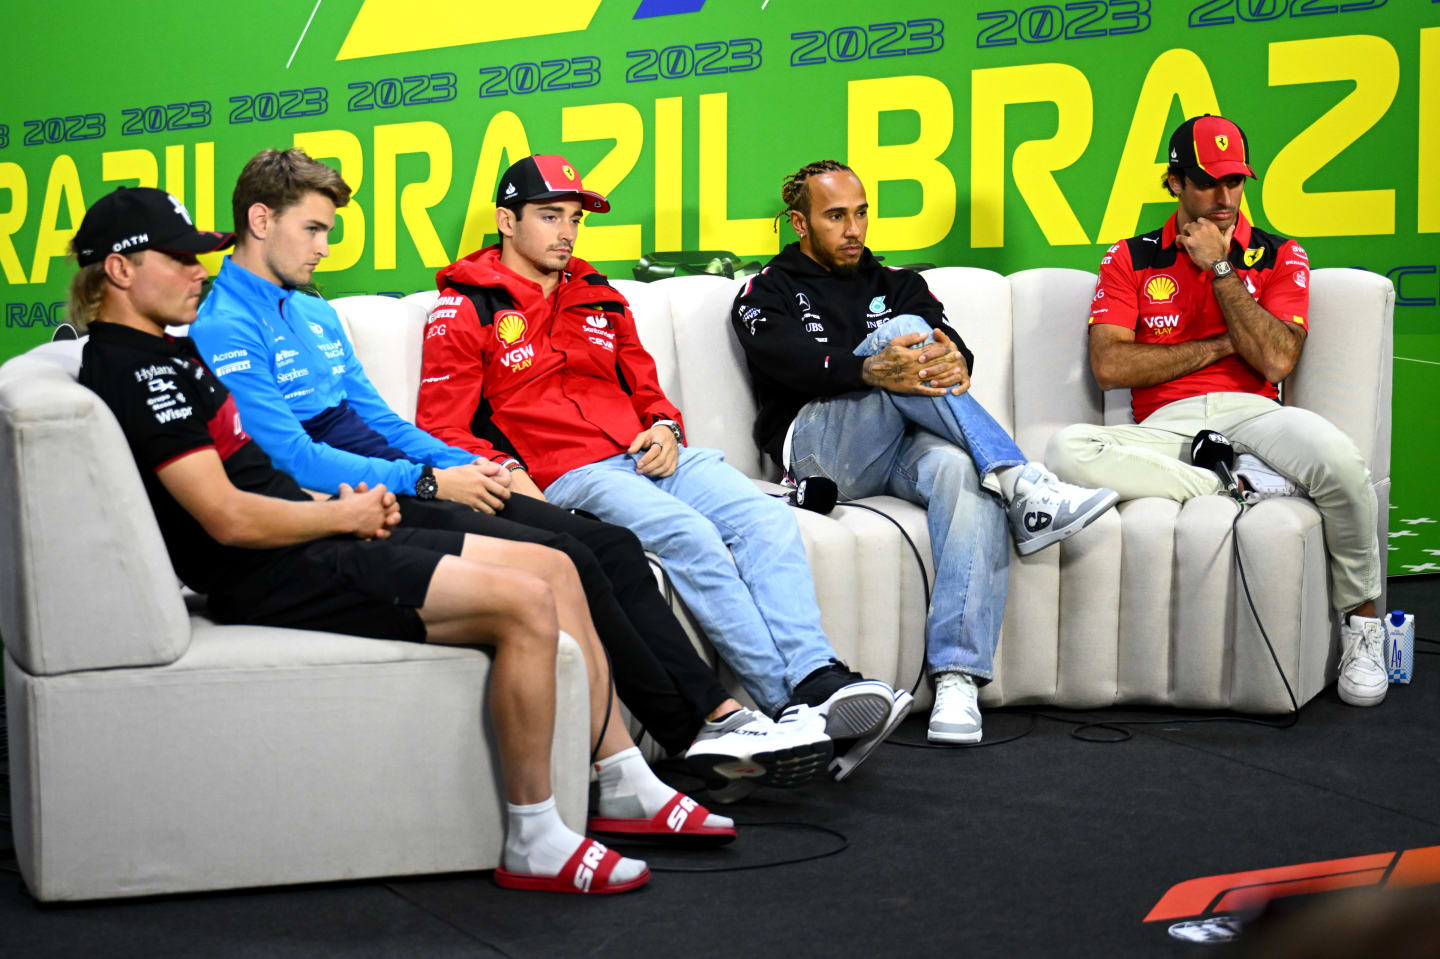 SAO PAULO, BRAZIL - NOVEMBER 02: Valtteri Bottas of Finland and Alfa Romeo F1, Logan Sargeant of United States and Williams, Charles Leclerc of Monaco and Ferrari, Lewis Hamilton of Great Britain and Mercedes and Carlos Sainz of Spain and Ferrari look on in the Drivers Press Conference during previews ahead of the F1 Grand Prix of Brazil at Autodromo Jose Carlos Pace on November 02, 2023 in Sao Paulo, Brazil. (Photo by Clive Mason/Getty Images)